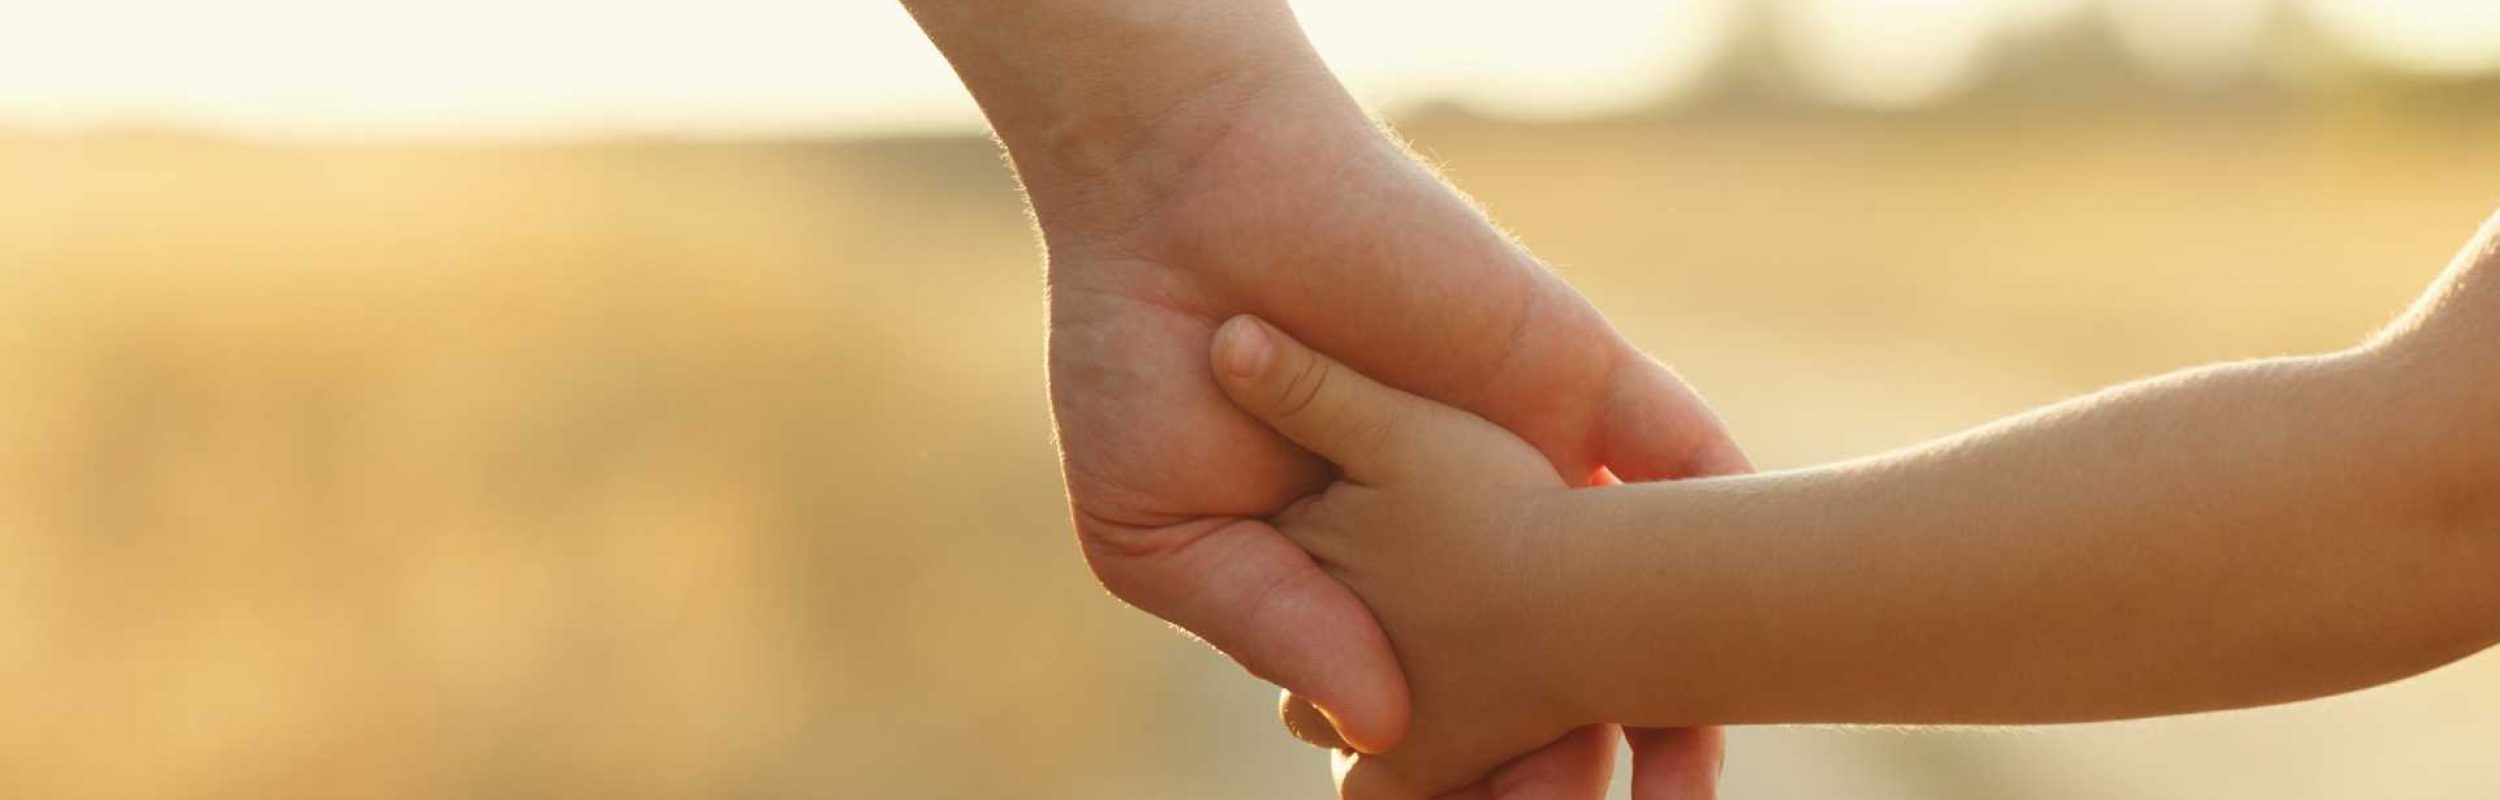 Holding hands after foster family support therapy